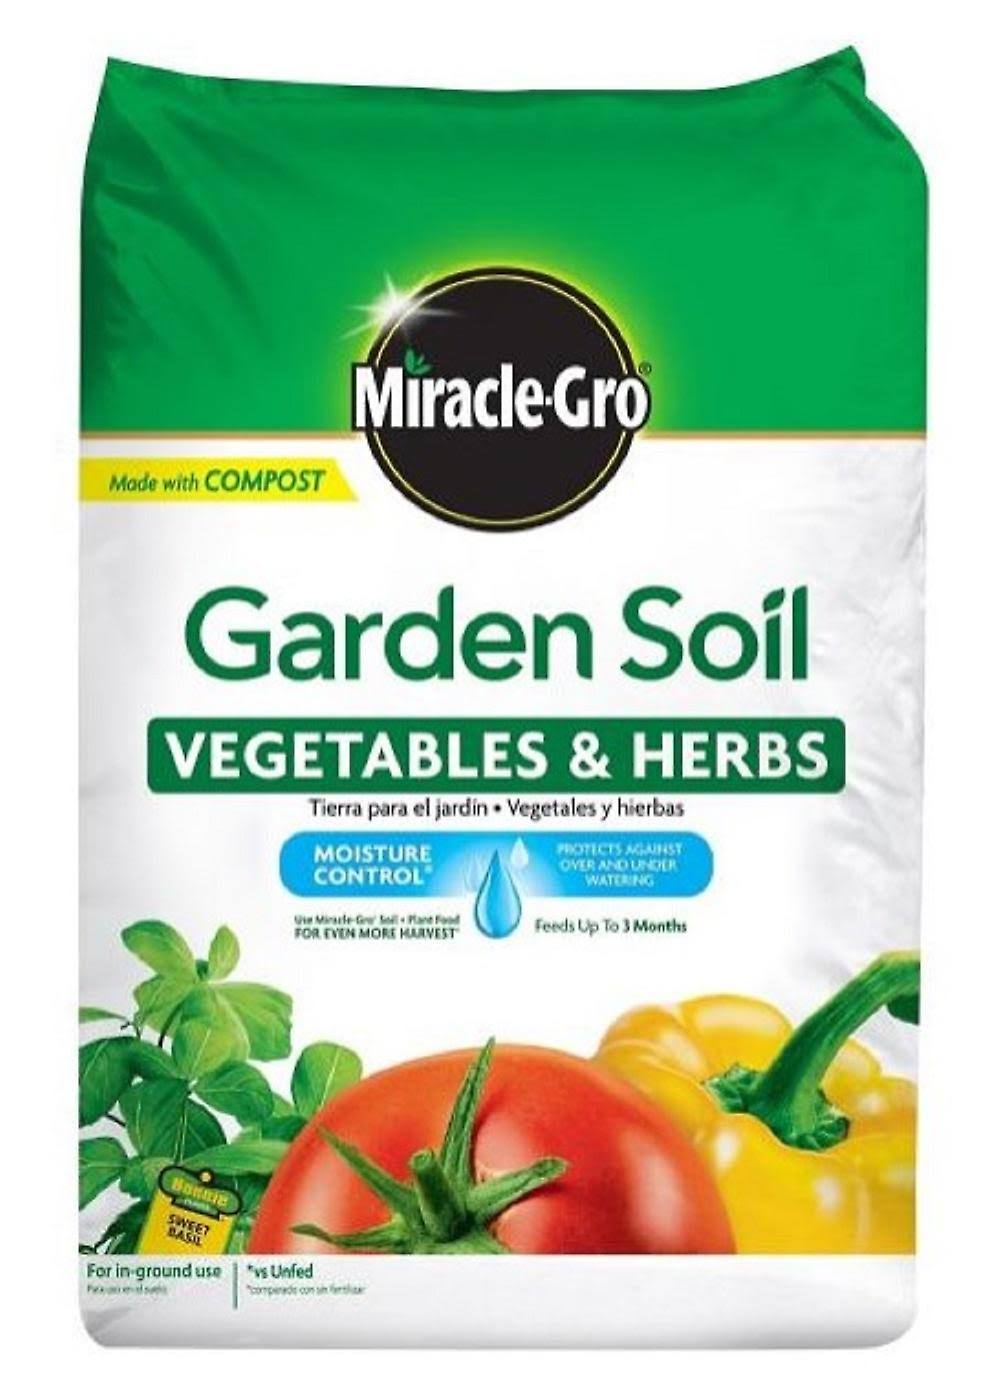 Miracle-gro Garden Soil - Vegetables and Herbs, 1.5cu ft